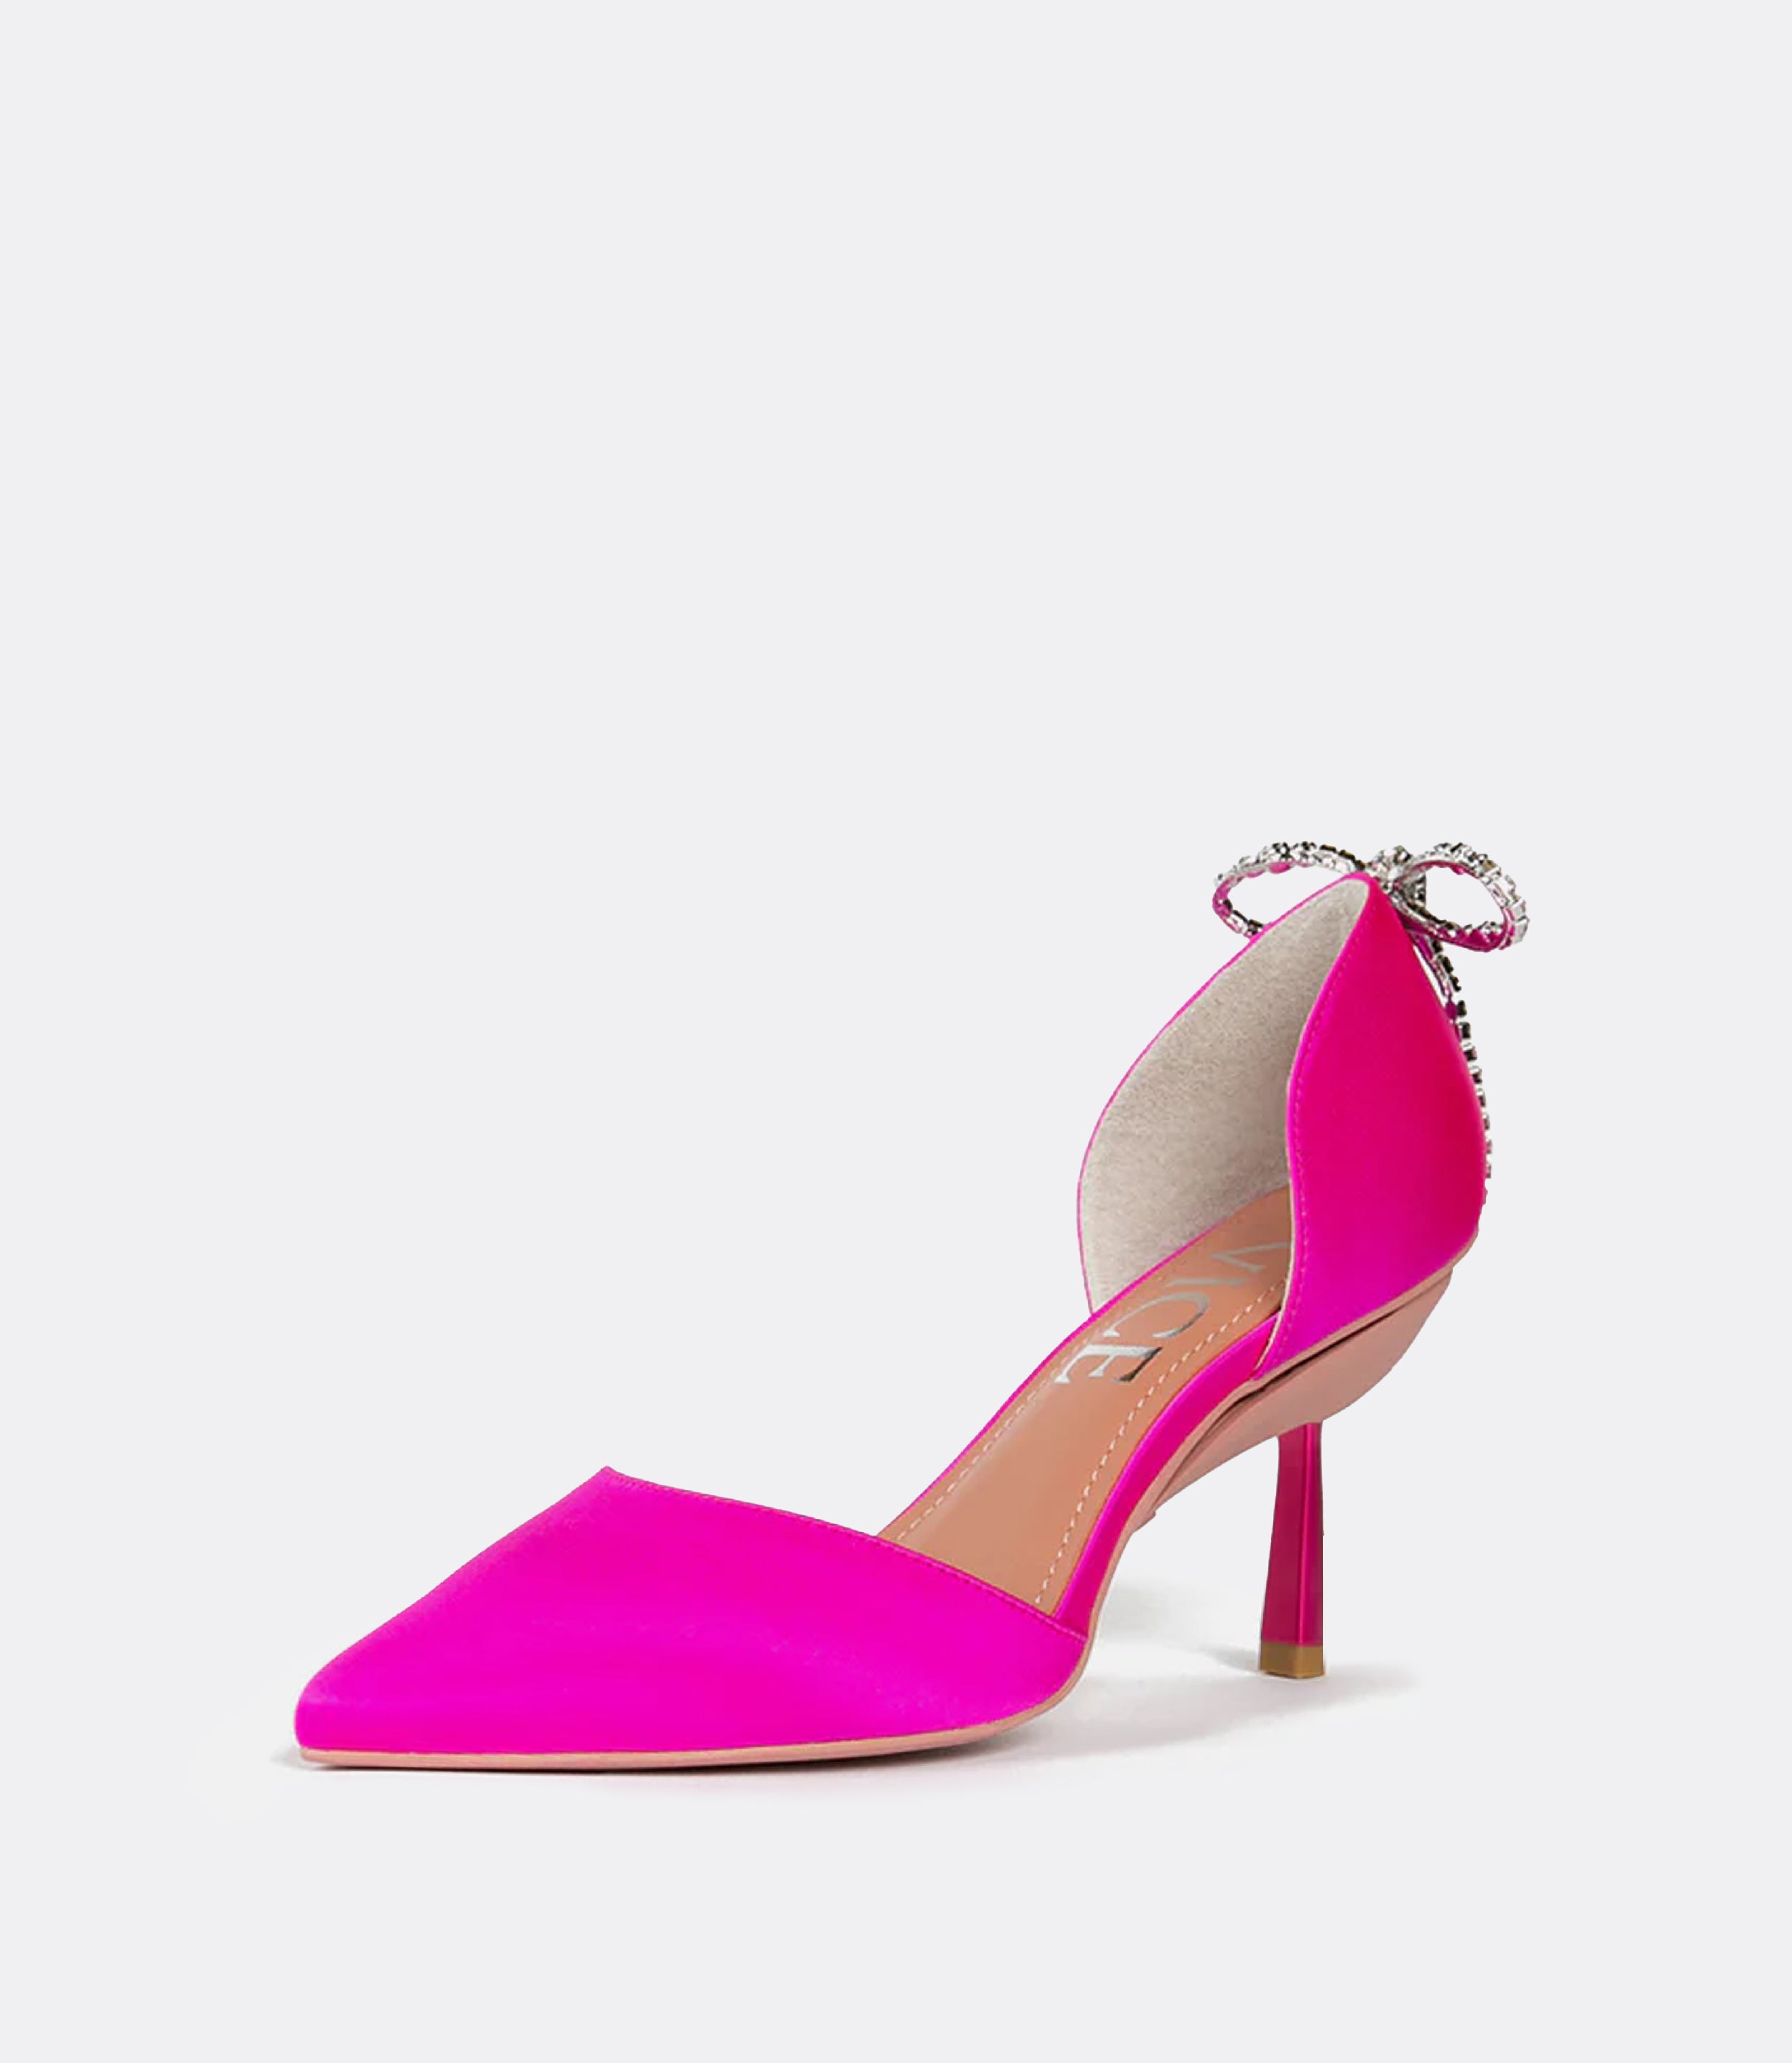 Front view of the fuchsia silk heel.